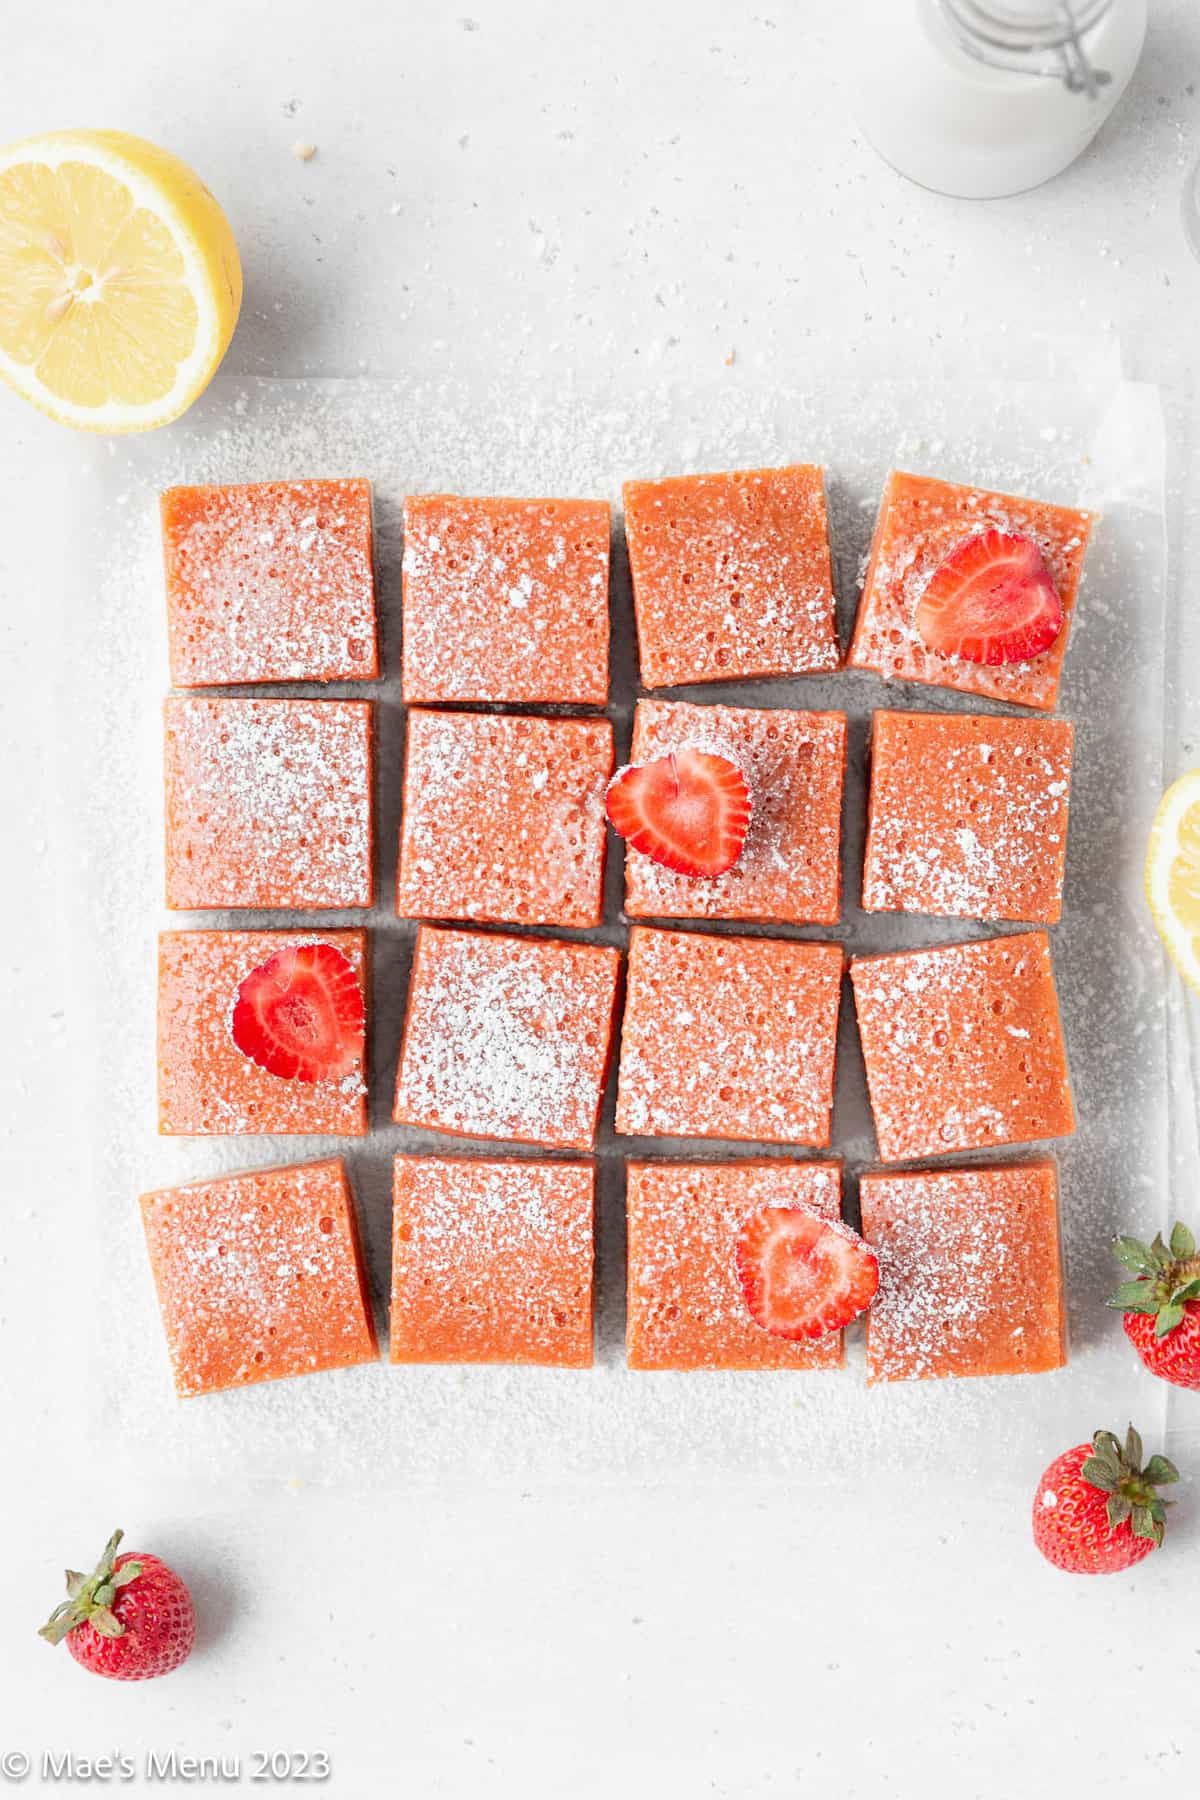 A cut up batch of strawberry lemonade bars on the counter with strawberries and lemons.